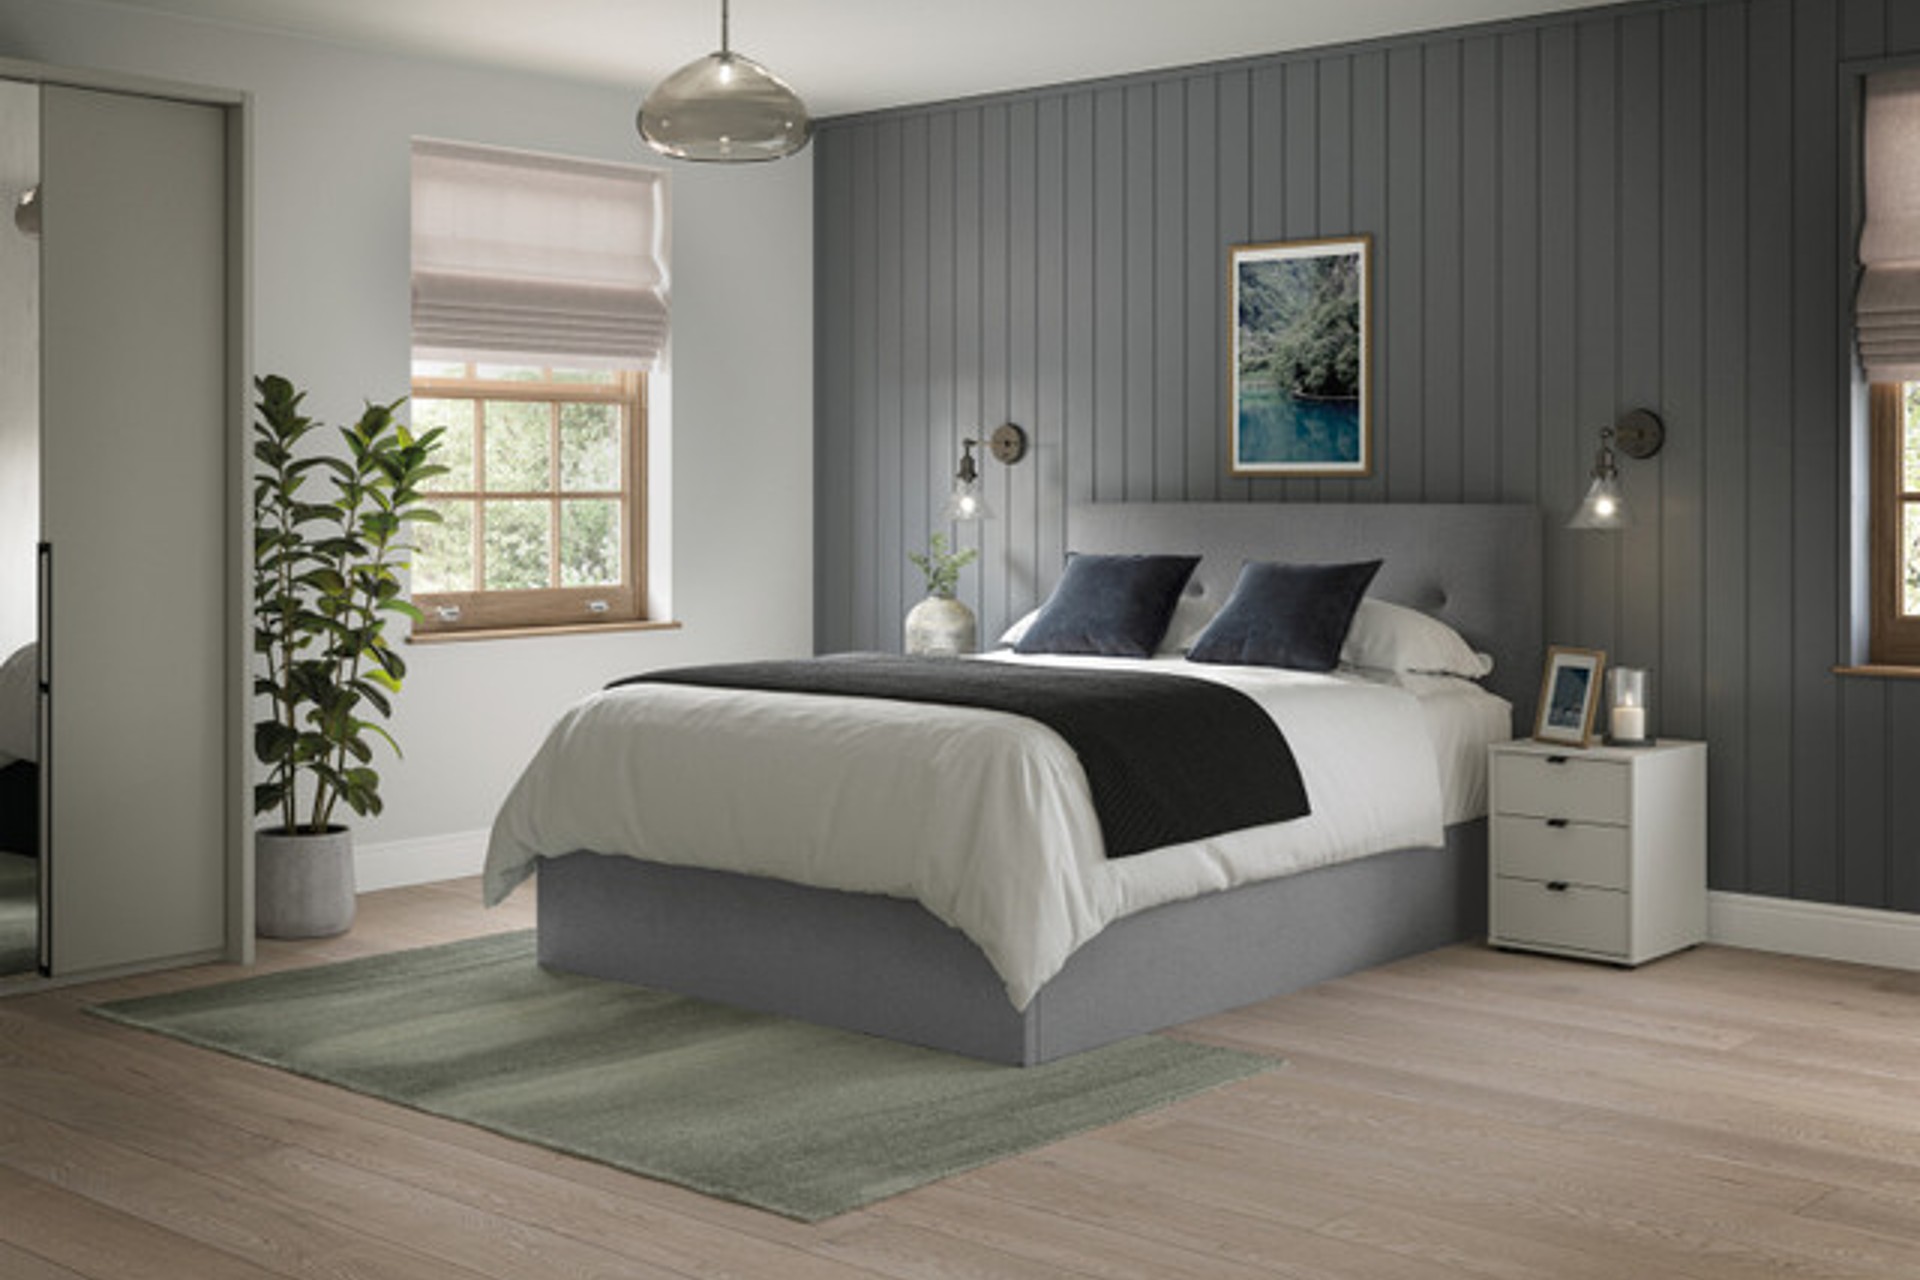 Kennedy grey ottoman bed with built in storage